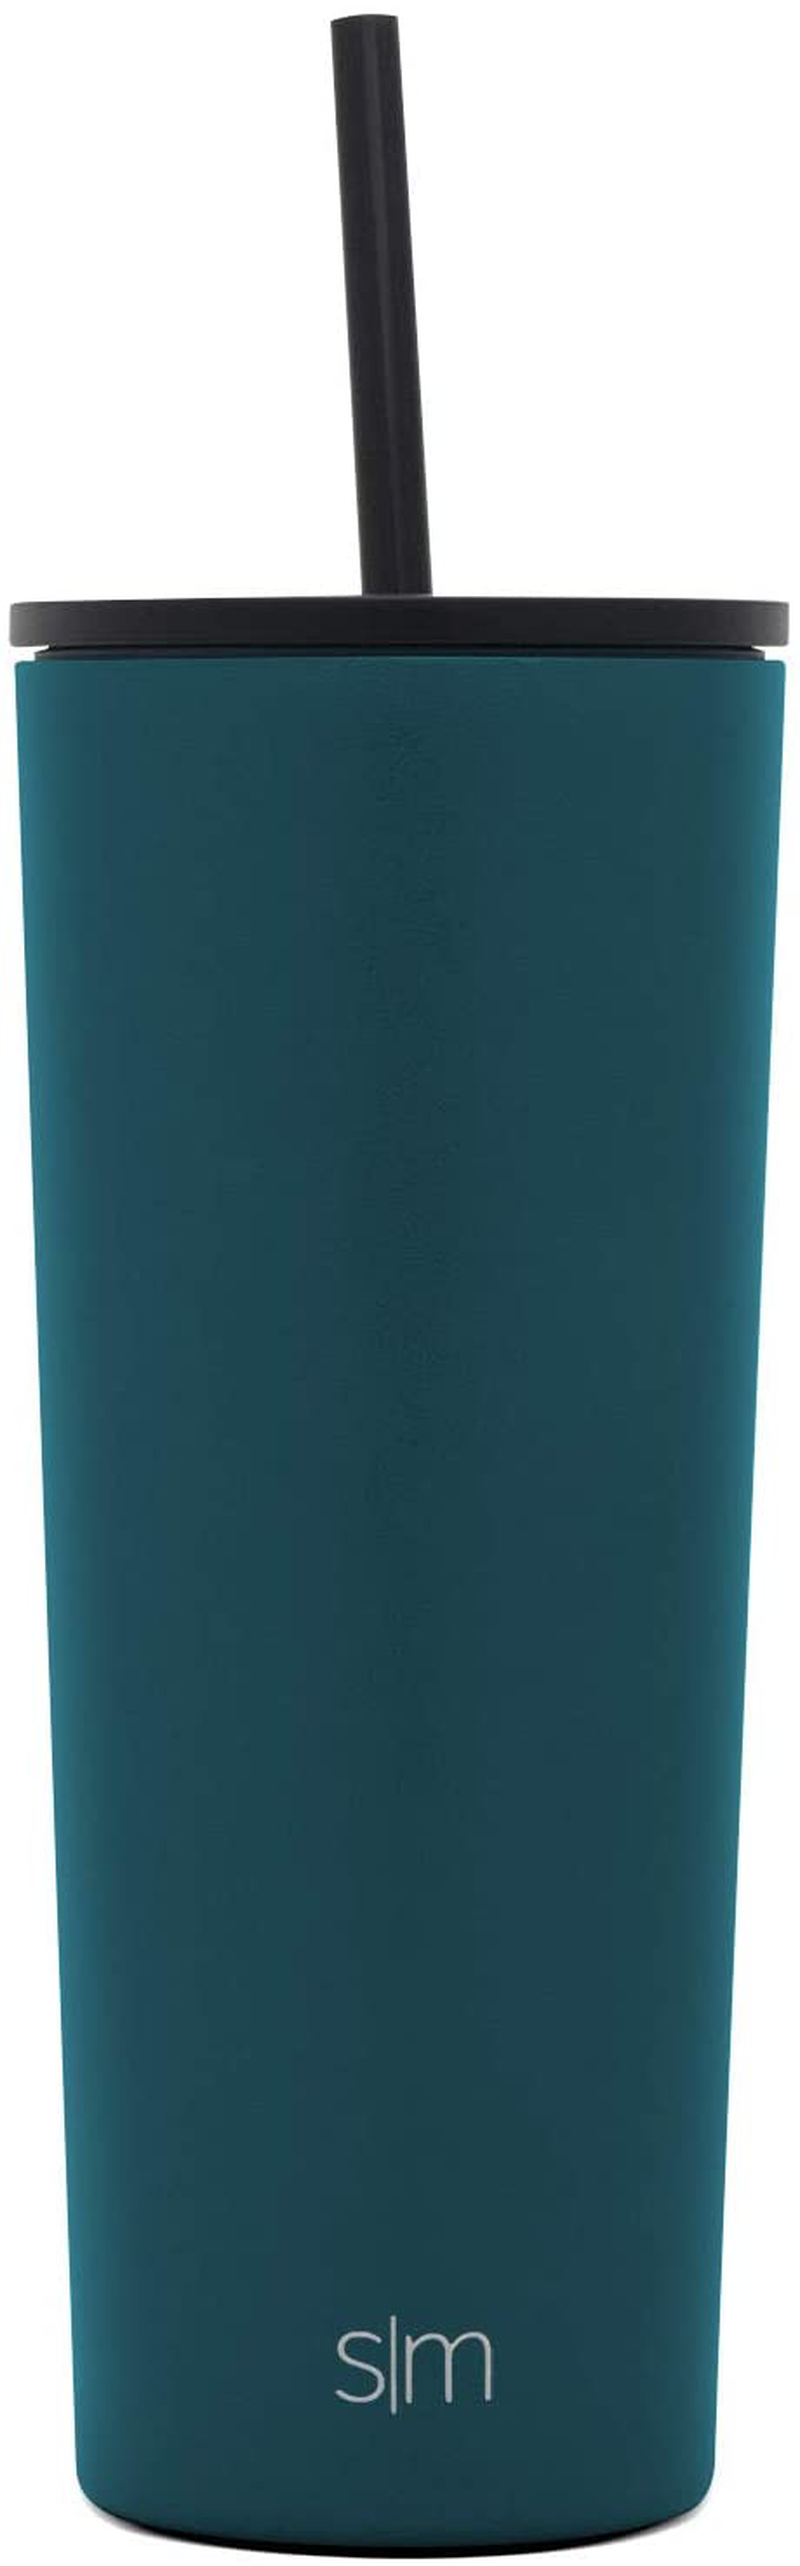 Simple Modern Classic Insulated Tumbler with Straw and Flip Lid - Stainless Steel Water Bottle Iced Coffee Travel Mug Cup 24oz (710ml) -Riptide